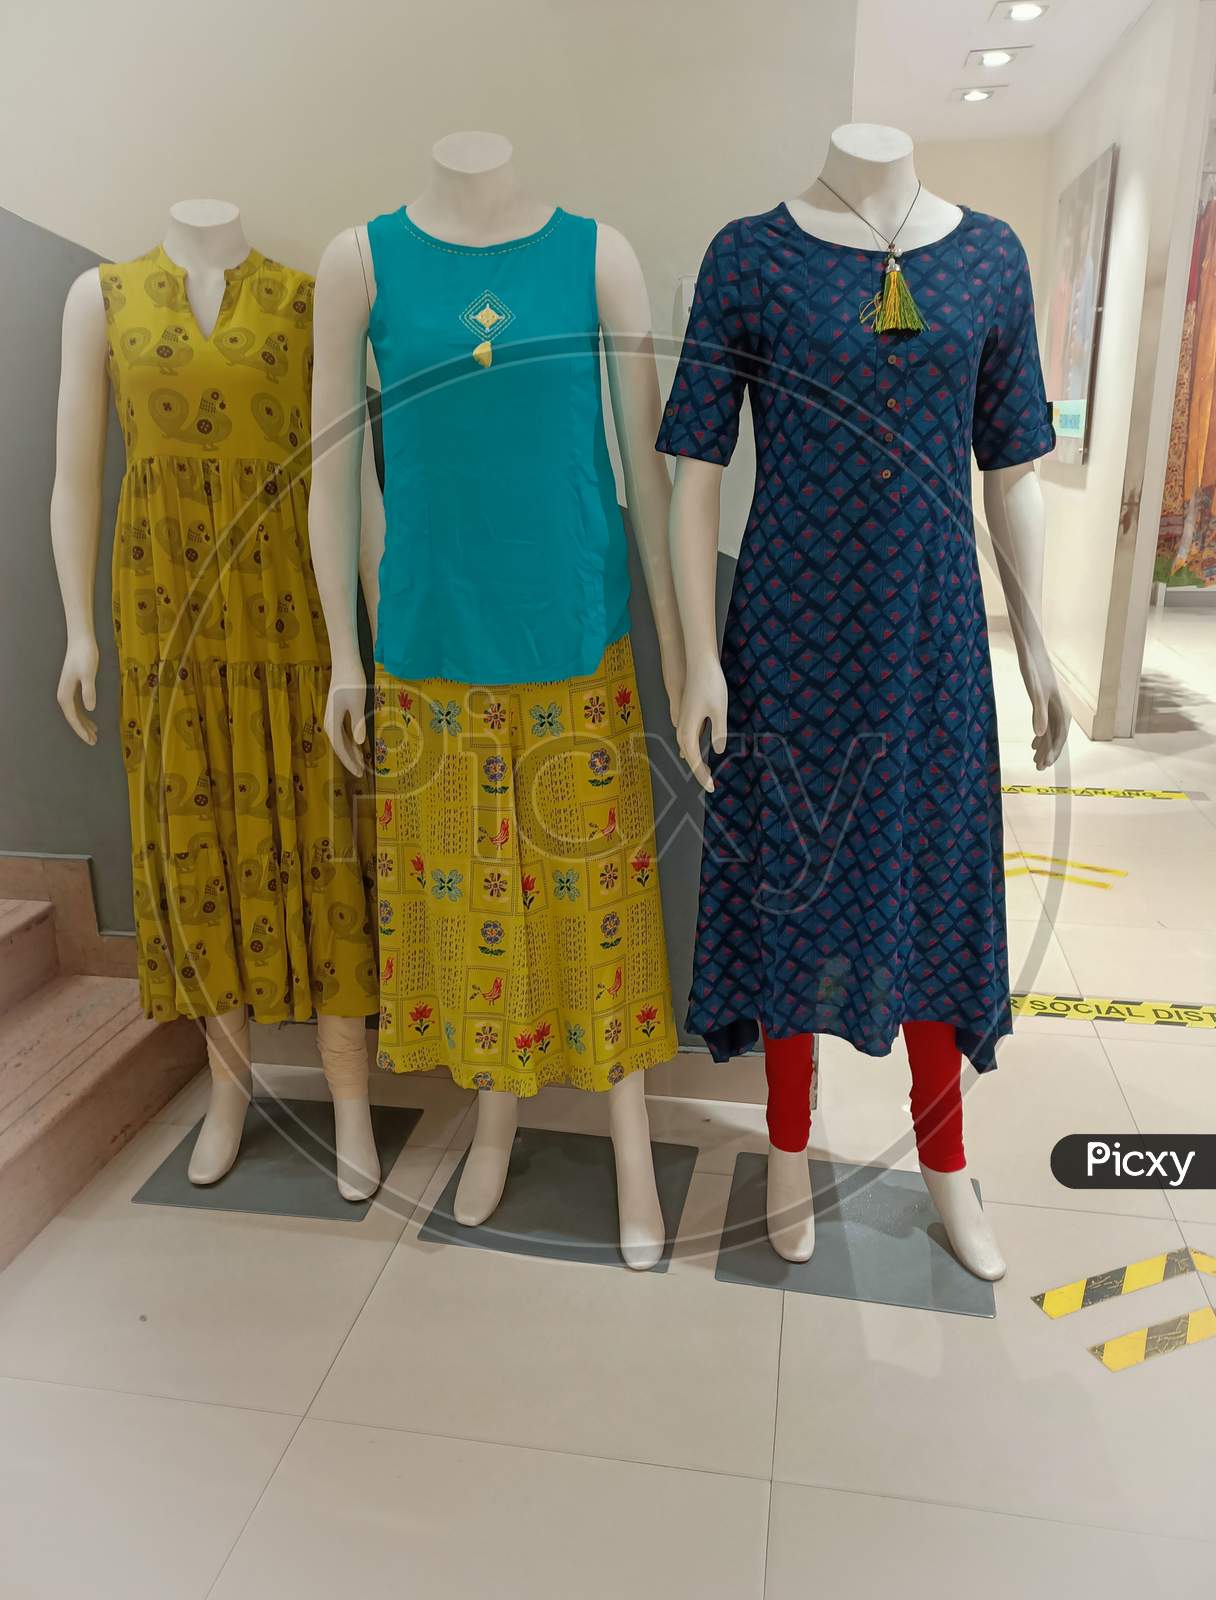 A Pretty picture of Mannequins dressed in traditional Indian Cotton Kurtis in in Multicolor and designs displayed at a Fashion store in Mysuru of Karnataka state in India.